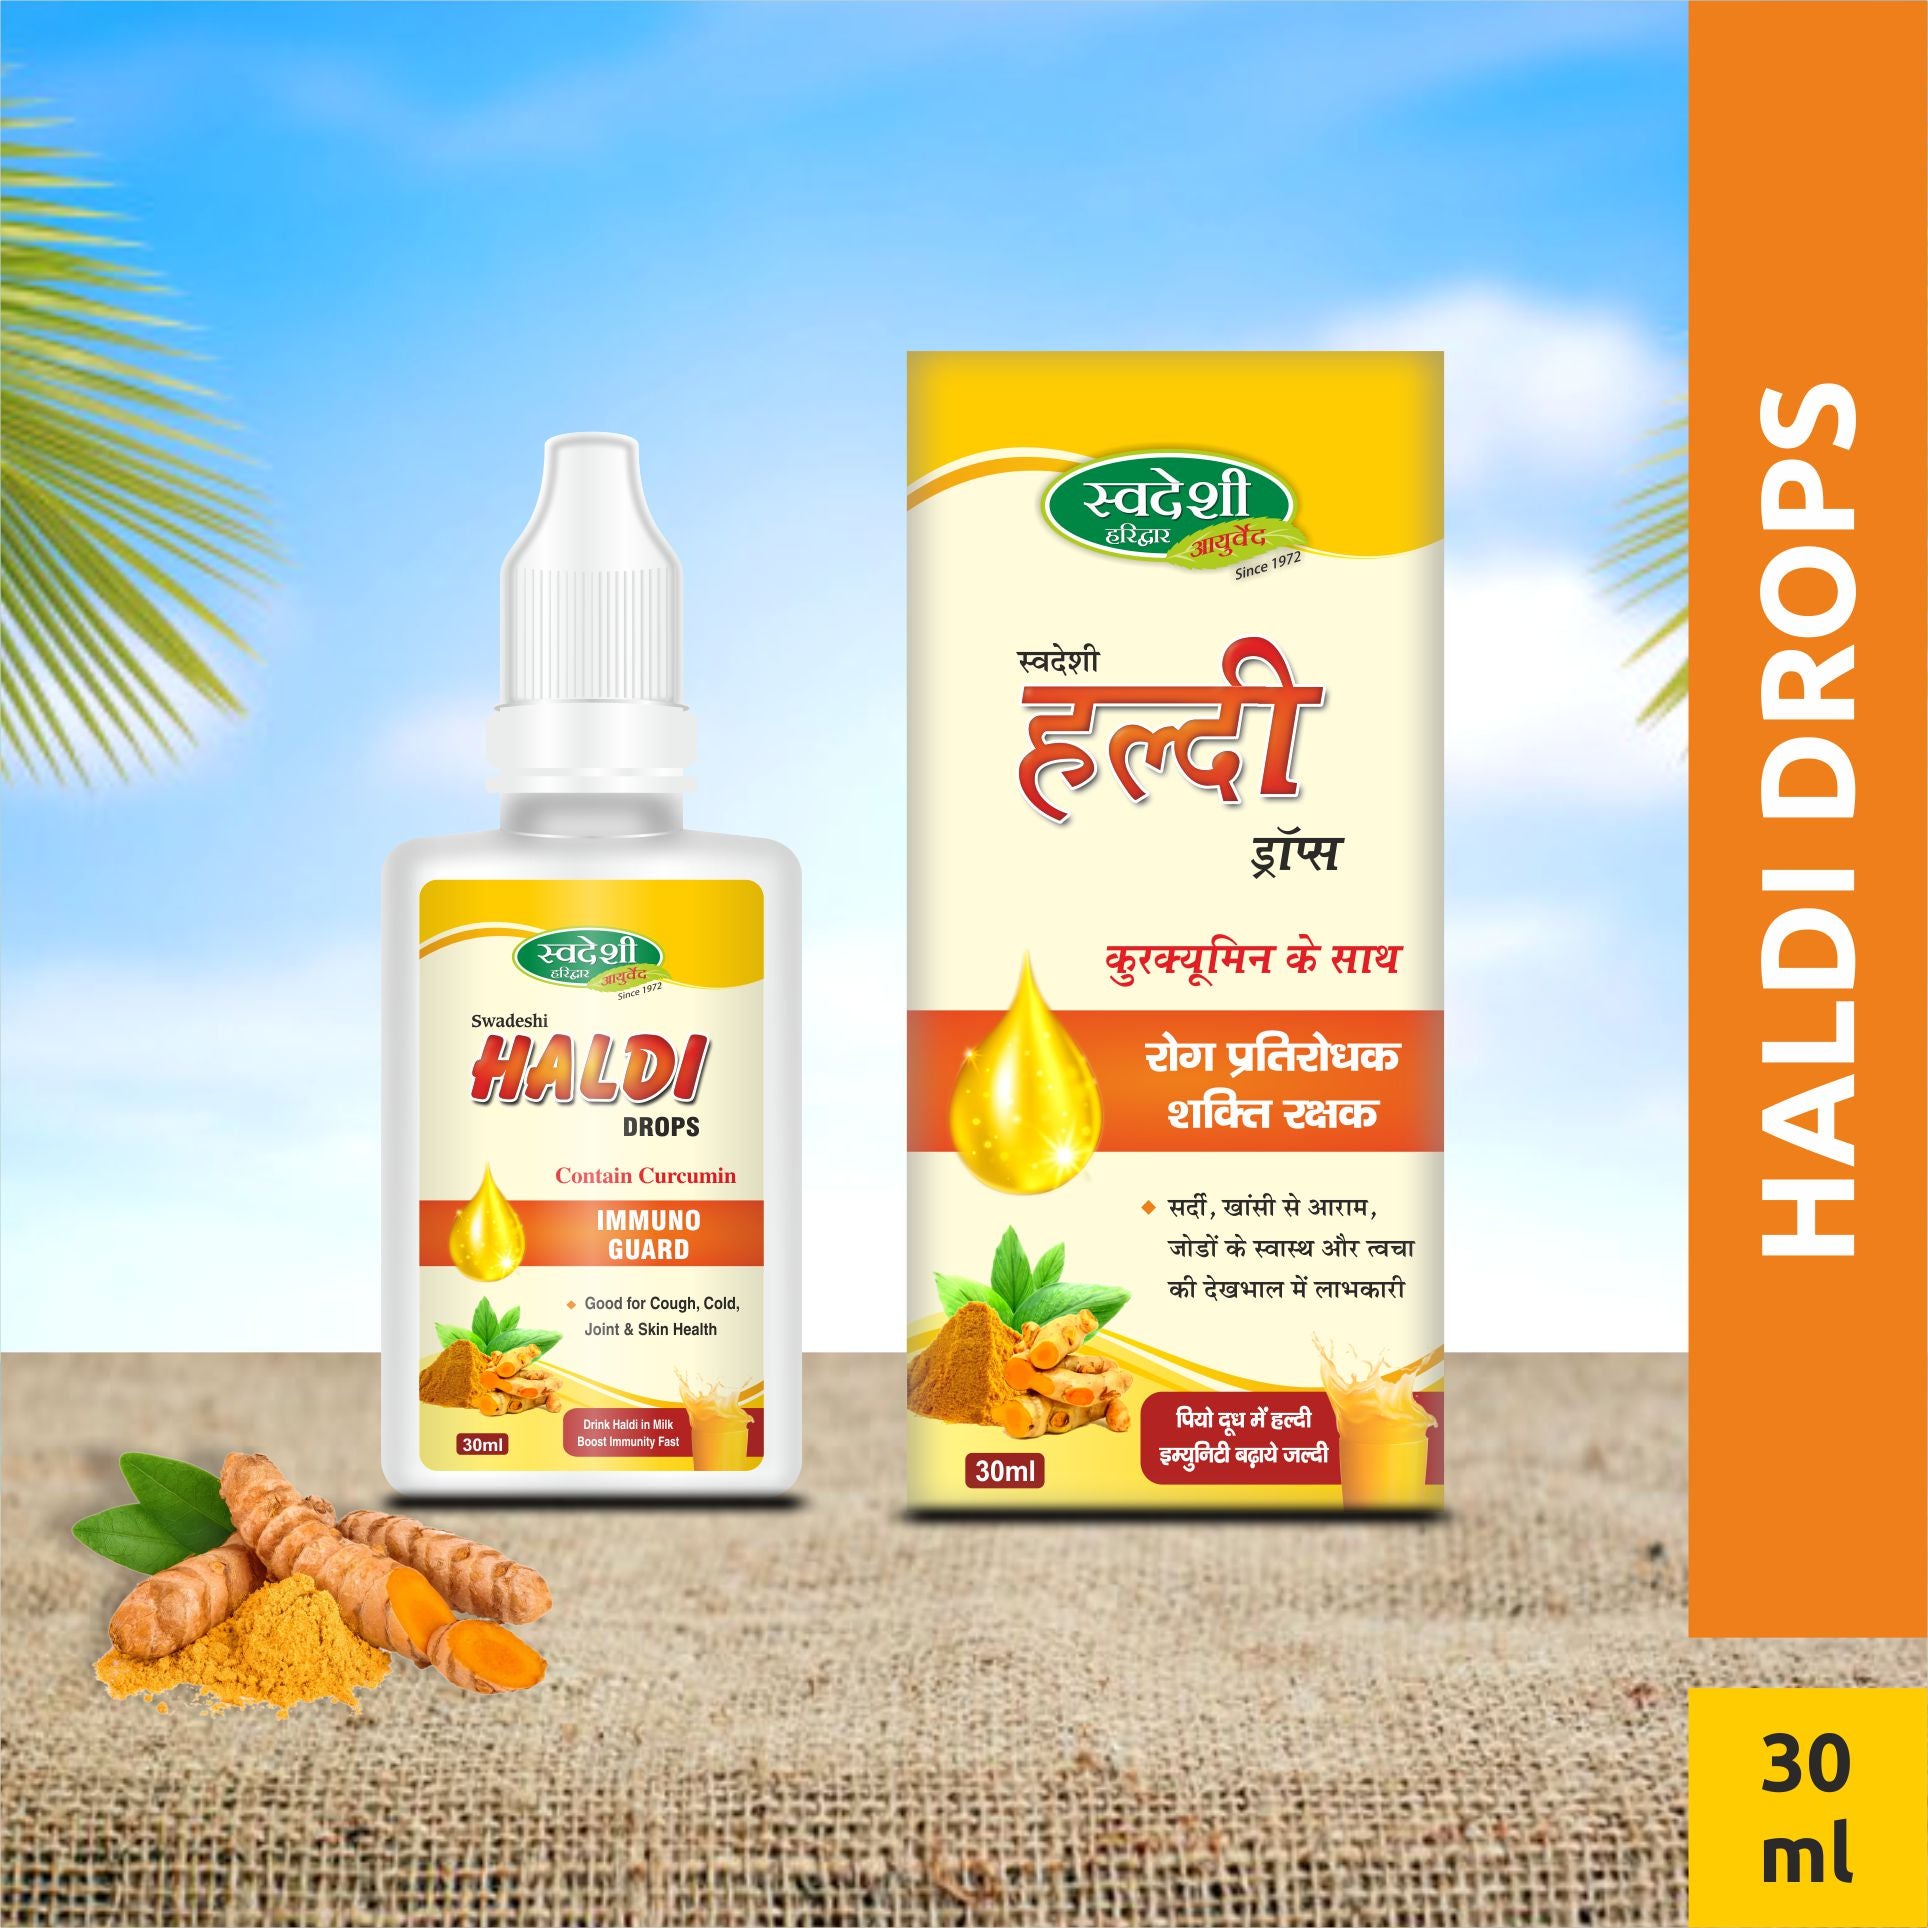 Vector illustration depicting the benefits of Swadeshi Haldi Drop, including improved immunity, anti-microbial properties, antioxidant support, and skin health maintenance.